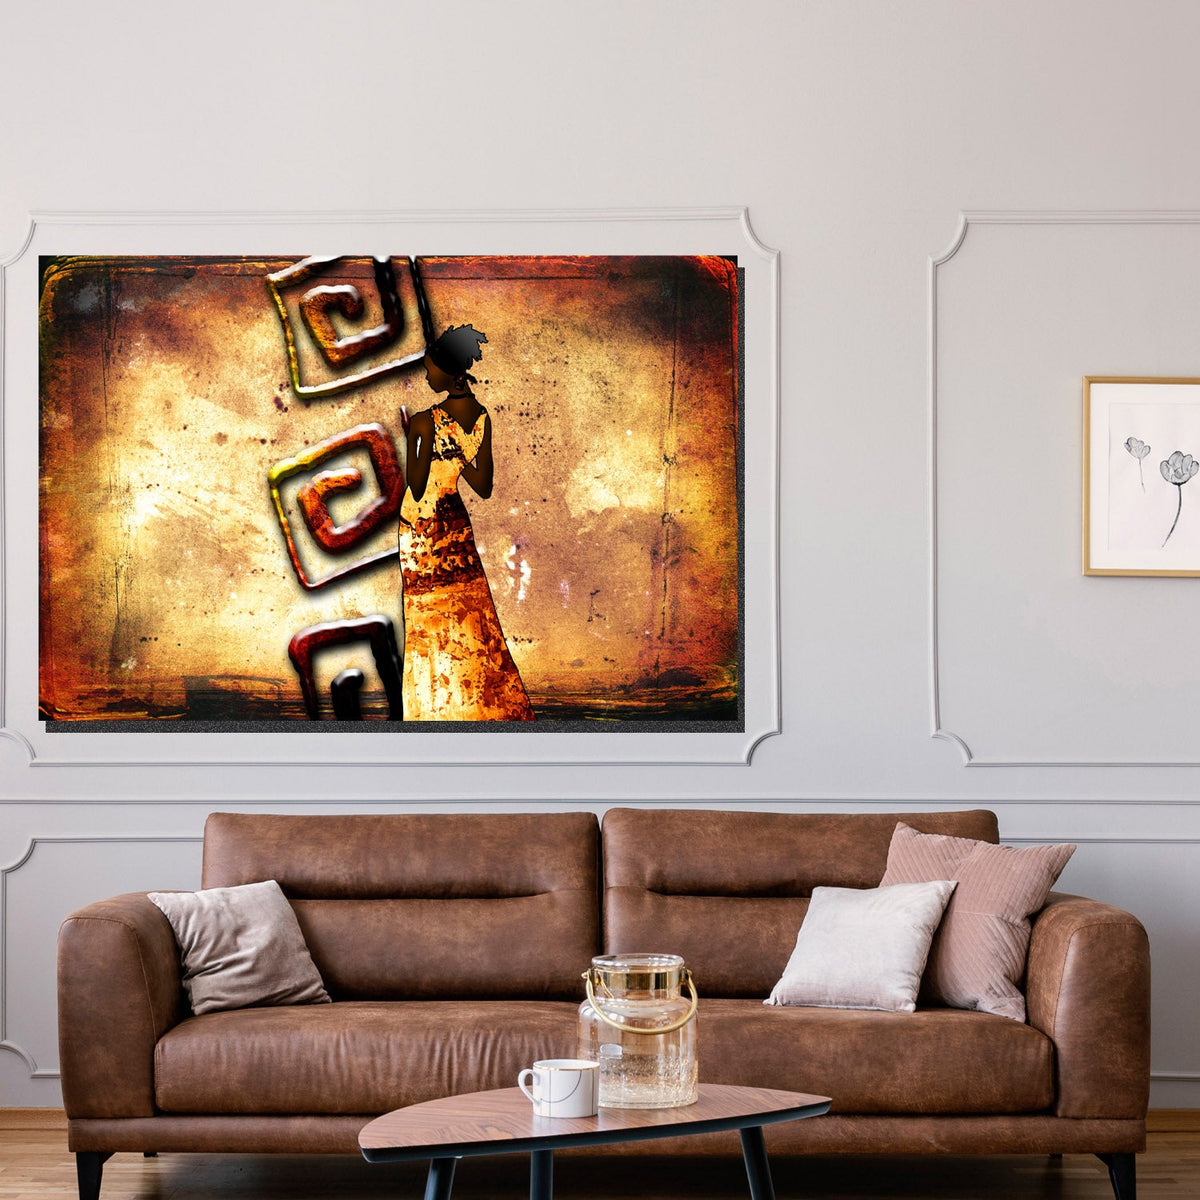 https://cdn.shopify.com/s/files/1/0387/9986/8044/products/SolitudeCanvasArtPrintStretched-3.jpg